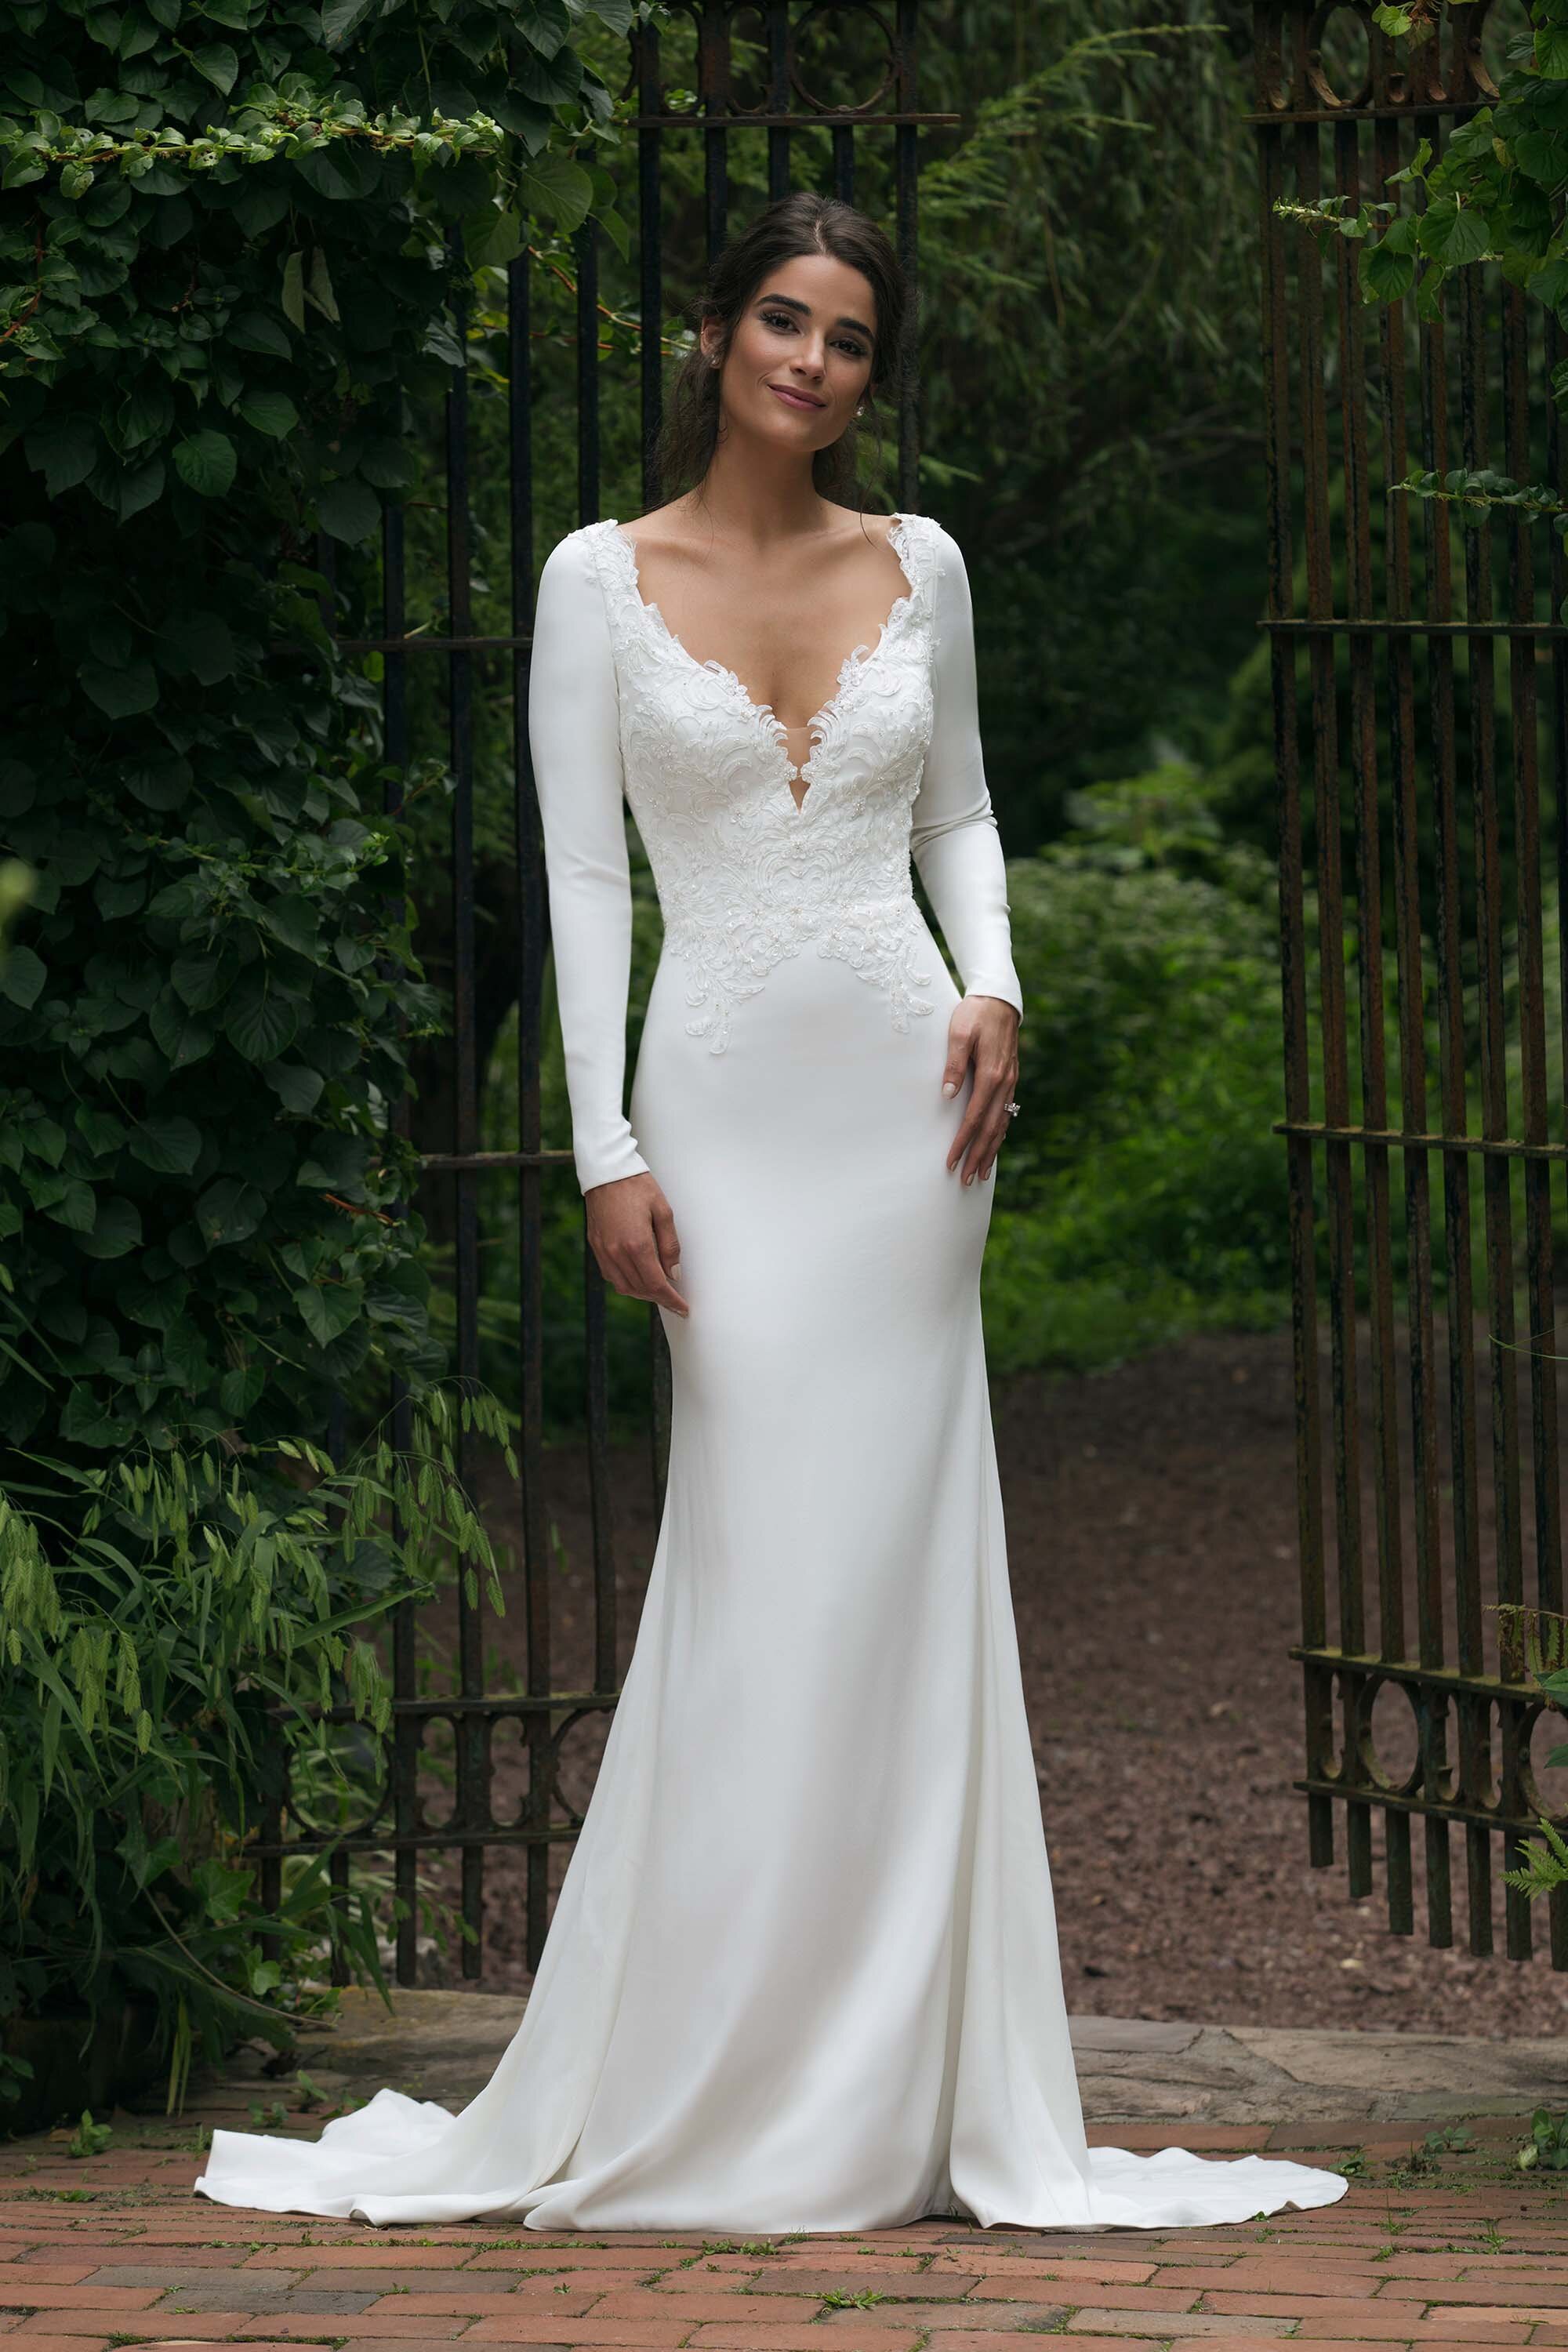 Wedding dress Josephine Product for Sale at NY City Bride